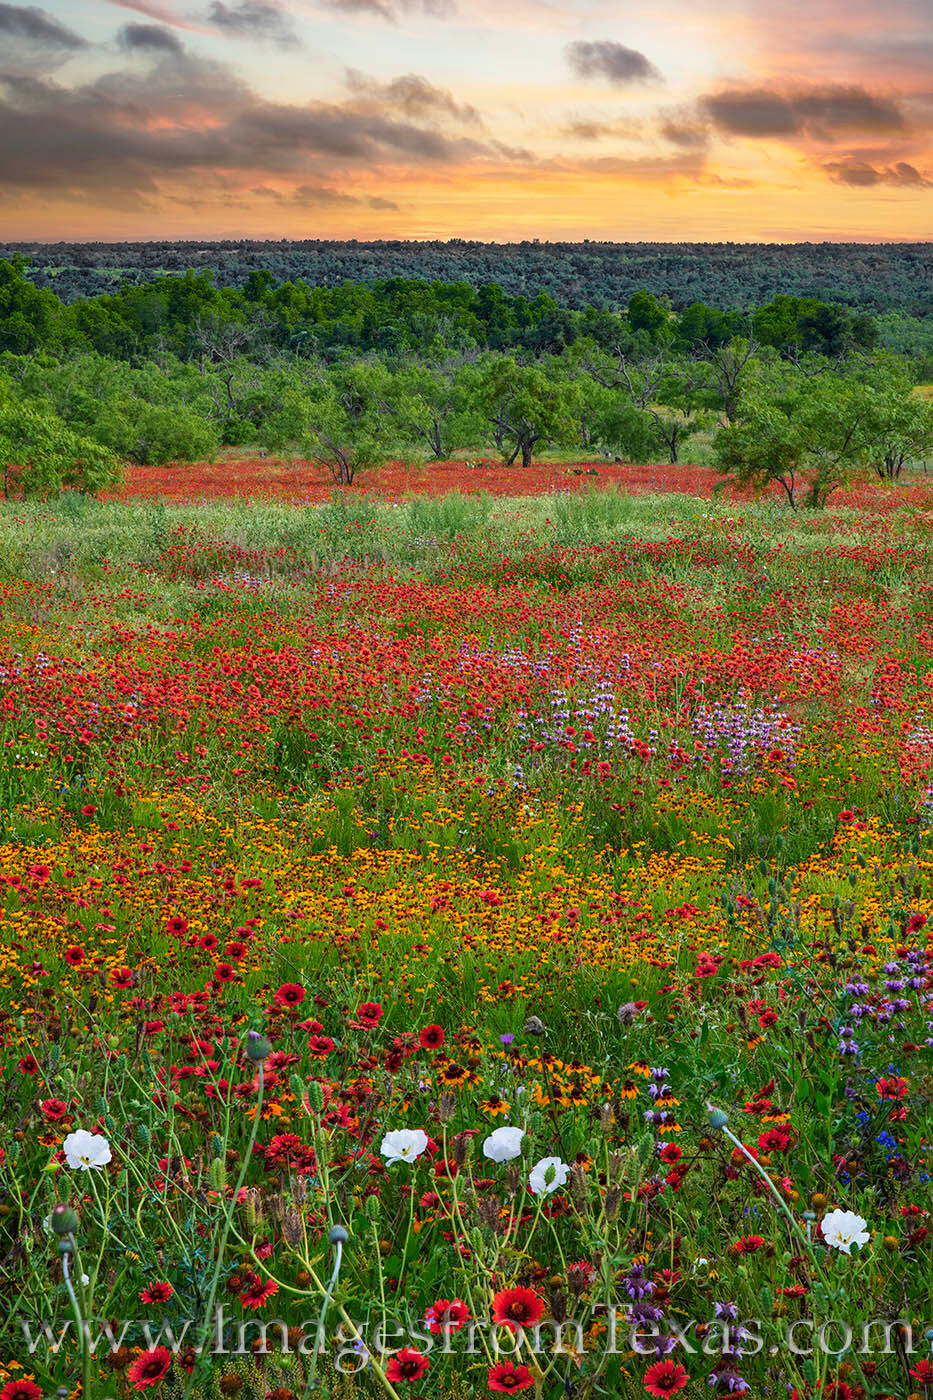 Low clouds move swiftly over the hill county as the last of the sunlight shines over a field of colorful wildflowers, including...